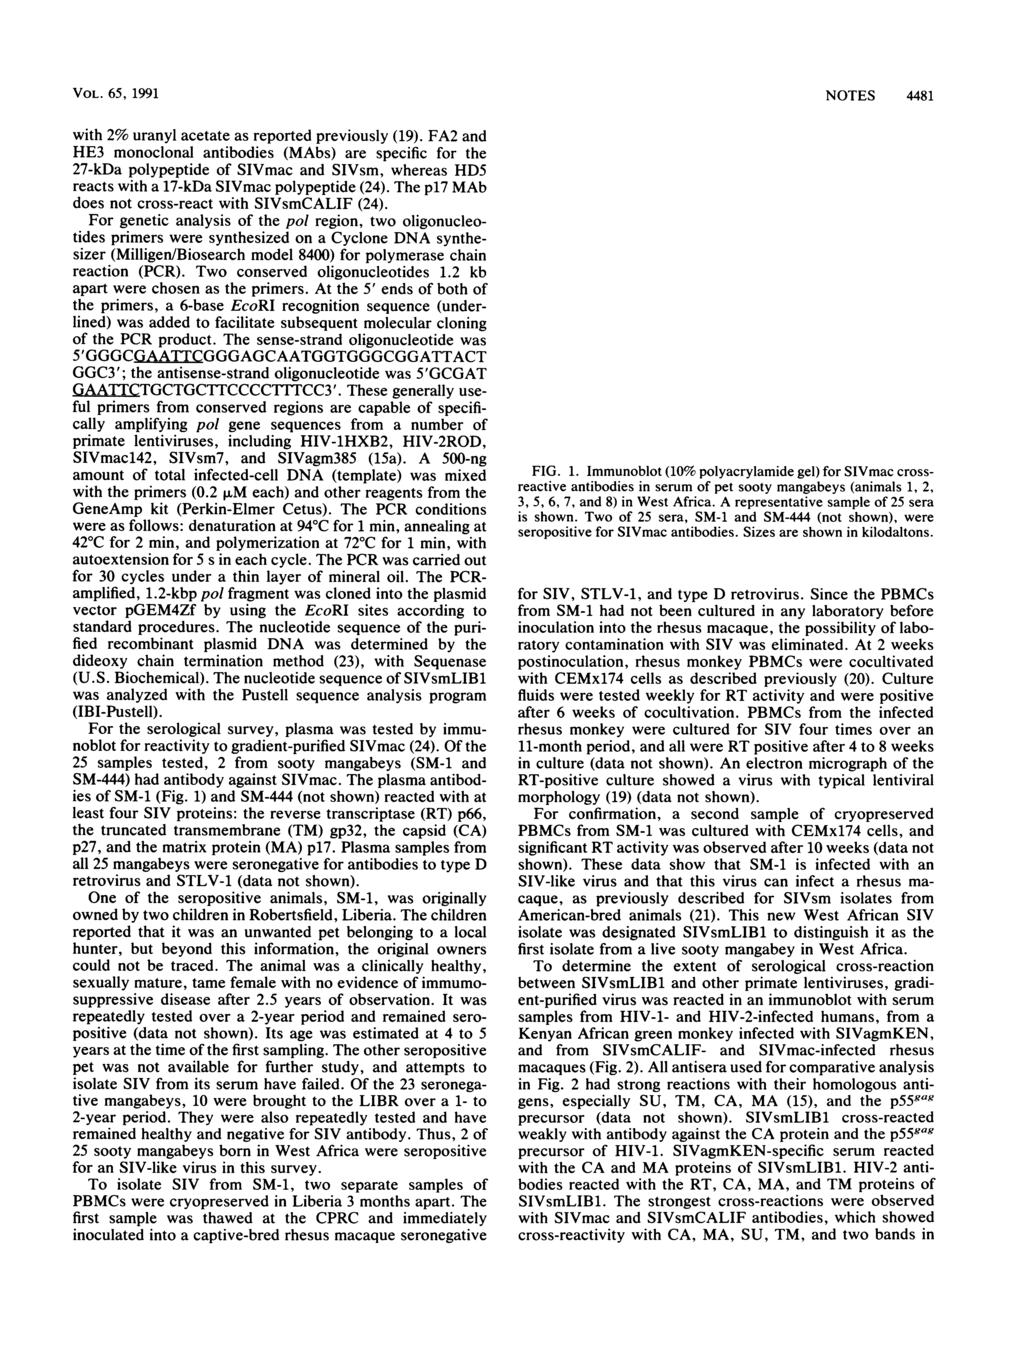 VOL. 65, 1991 with 2% uranyl acetate as reported previously (19).